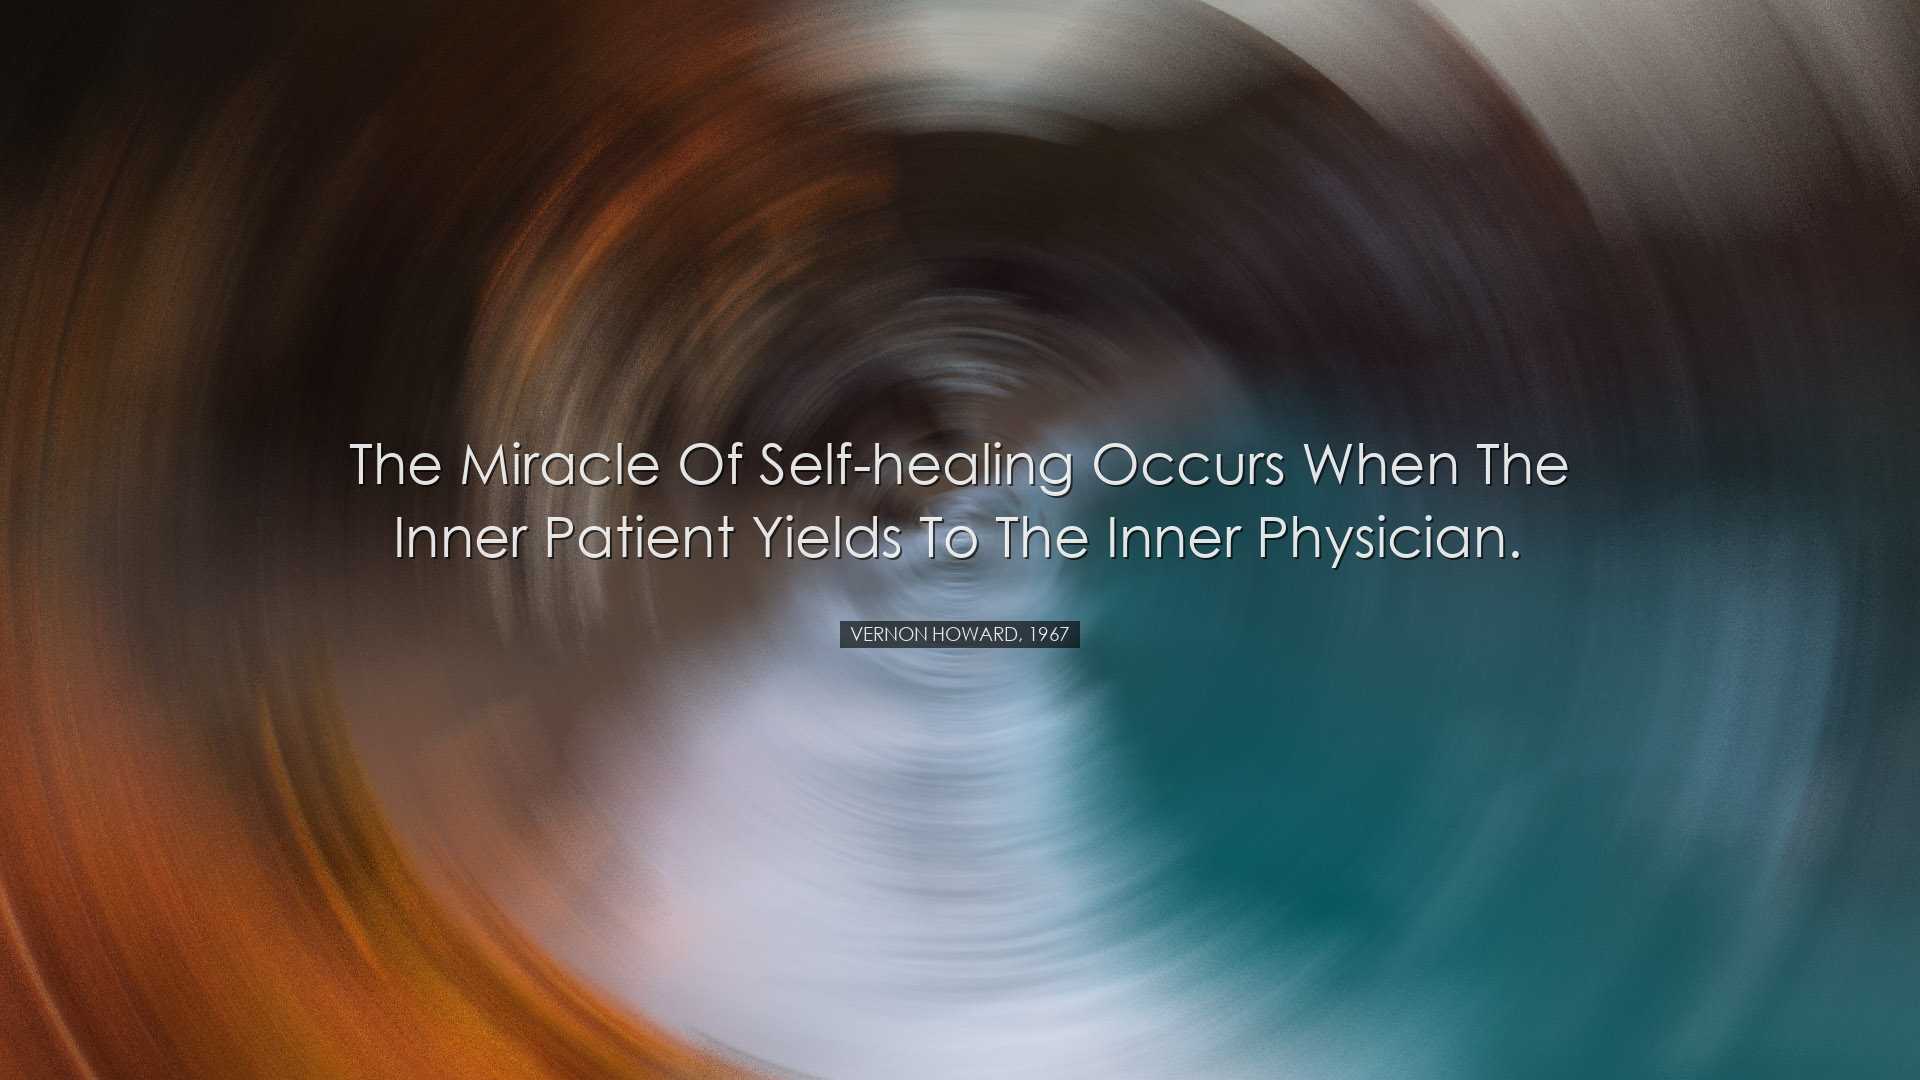 The miracle of self-healing occurs when the inner patient yields t